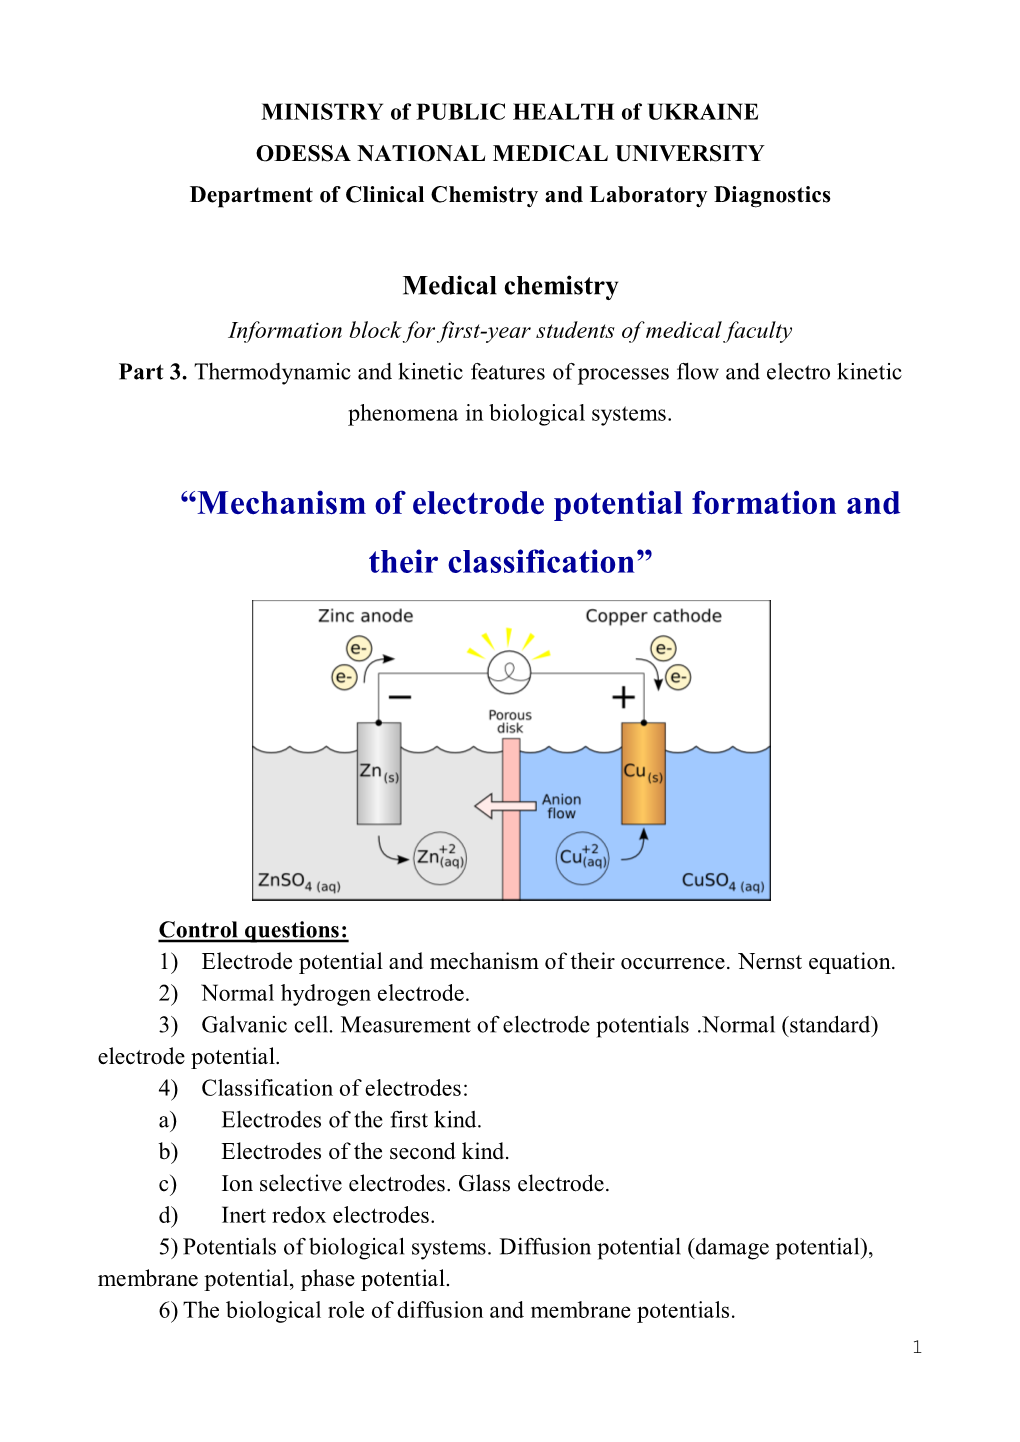 “Mechanism of Electrode Potential Formation and Their Classification”